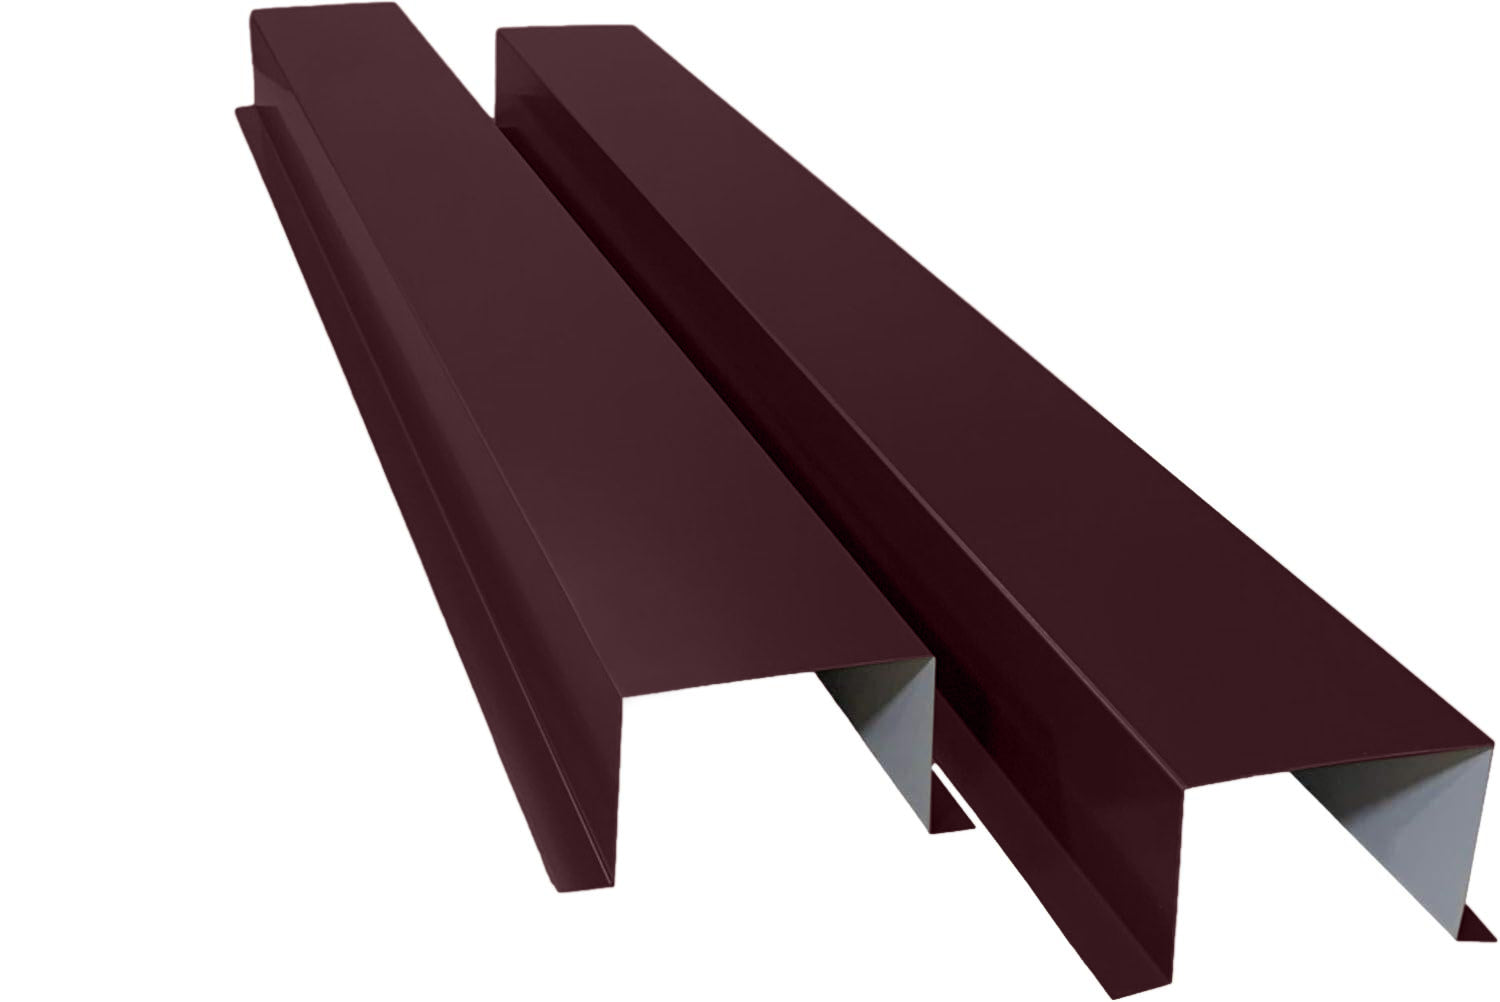 Two dark red metal J-channel pieces lying parallel to each other. Each piece has a rectangular profile with the top and bottom edges folded inward to form a J-shape. Made from 24 gauge painted metal, these Perma Cover Commercial Series - 24 Gauge Painted Metal HVAC Line Set Covers - Heavy Duty, Multiple Sizes & Colors provide sturdy HVAC line protection with their crisp, clean edges and uniform color.